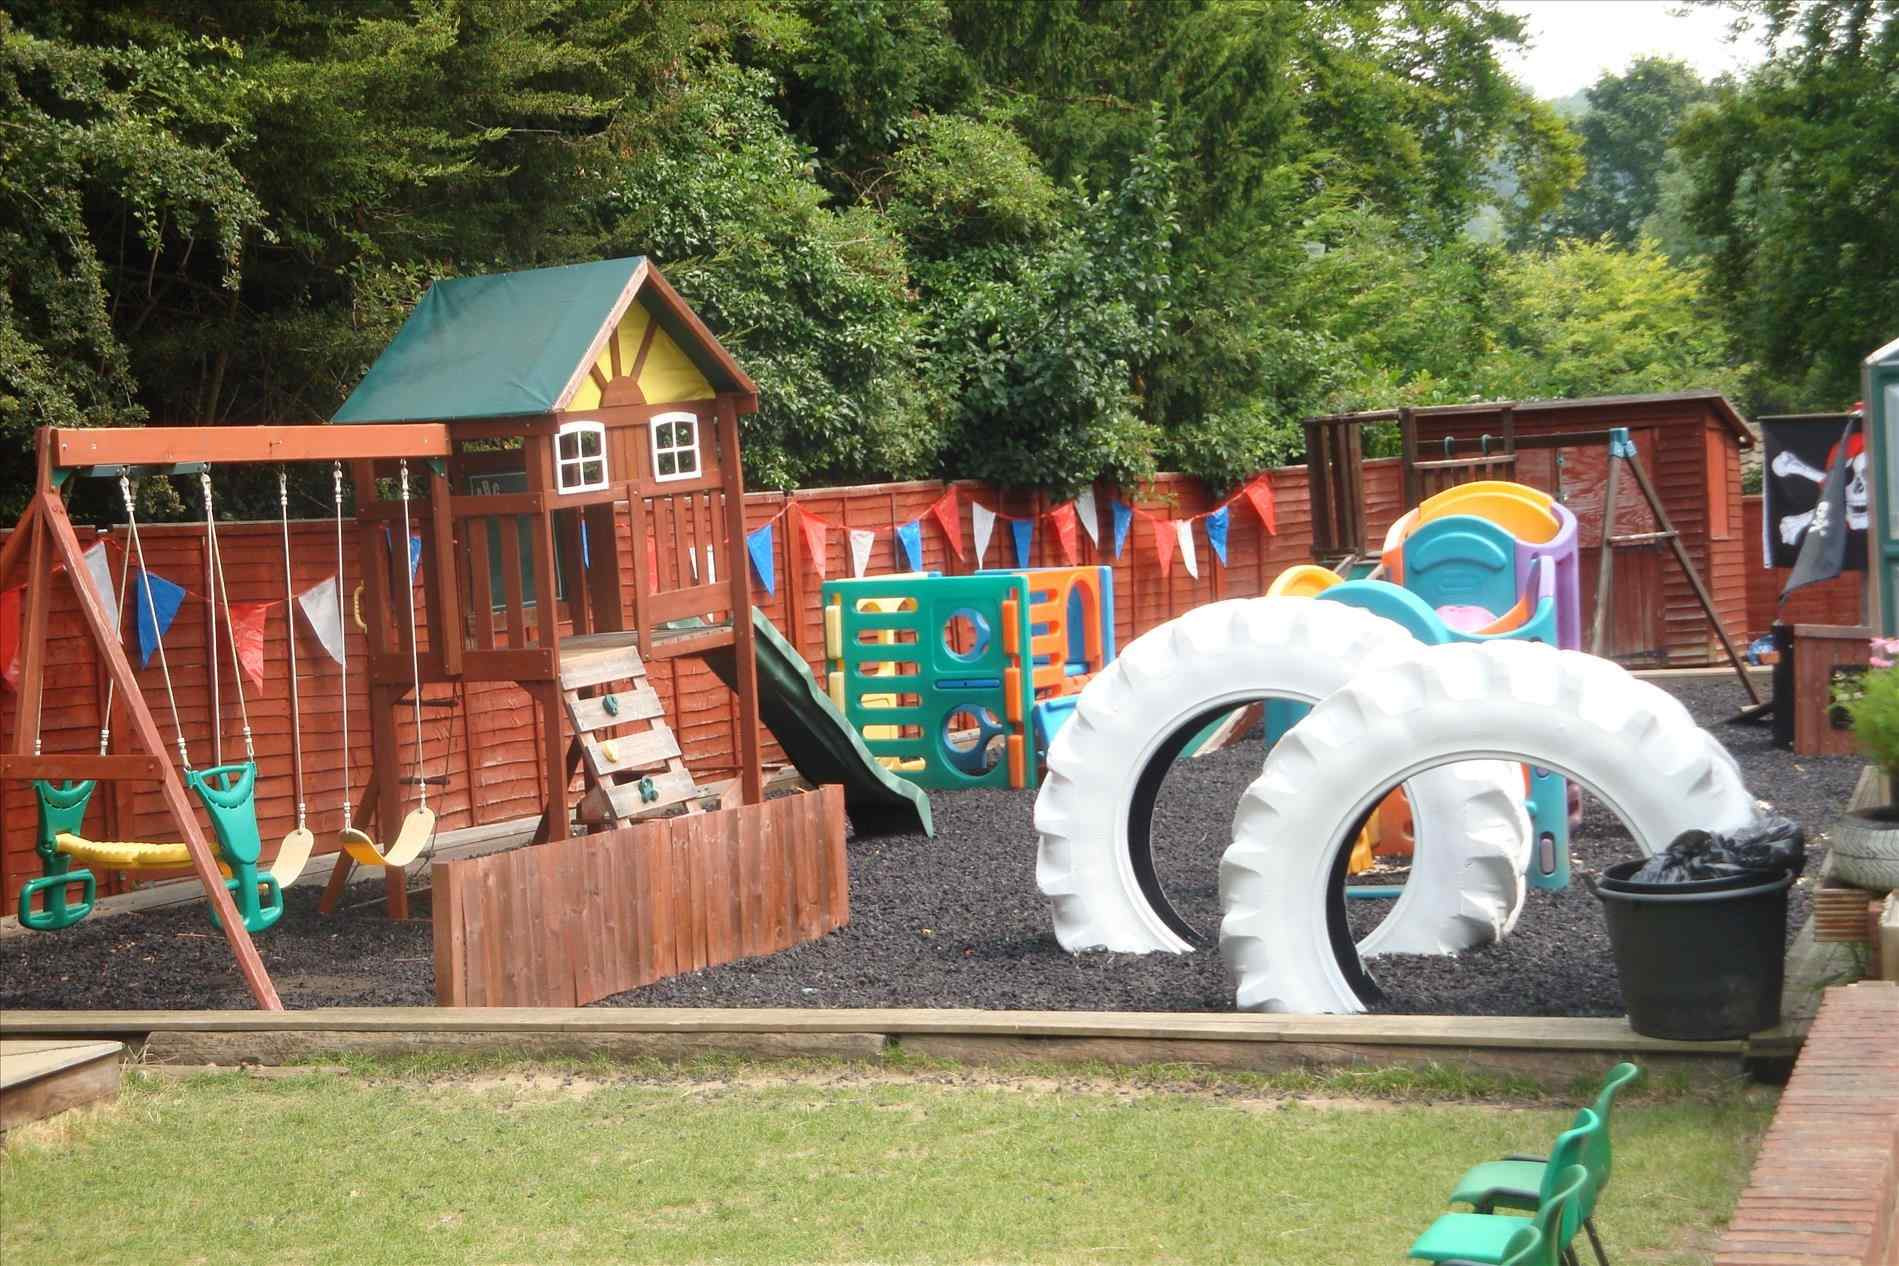 Kids Outdoor Play Area
 Play Area For Kids In Backyard